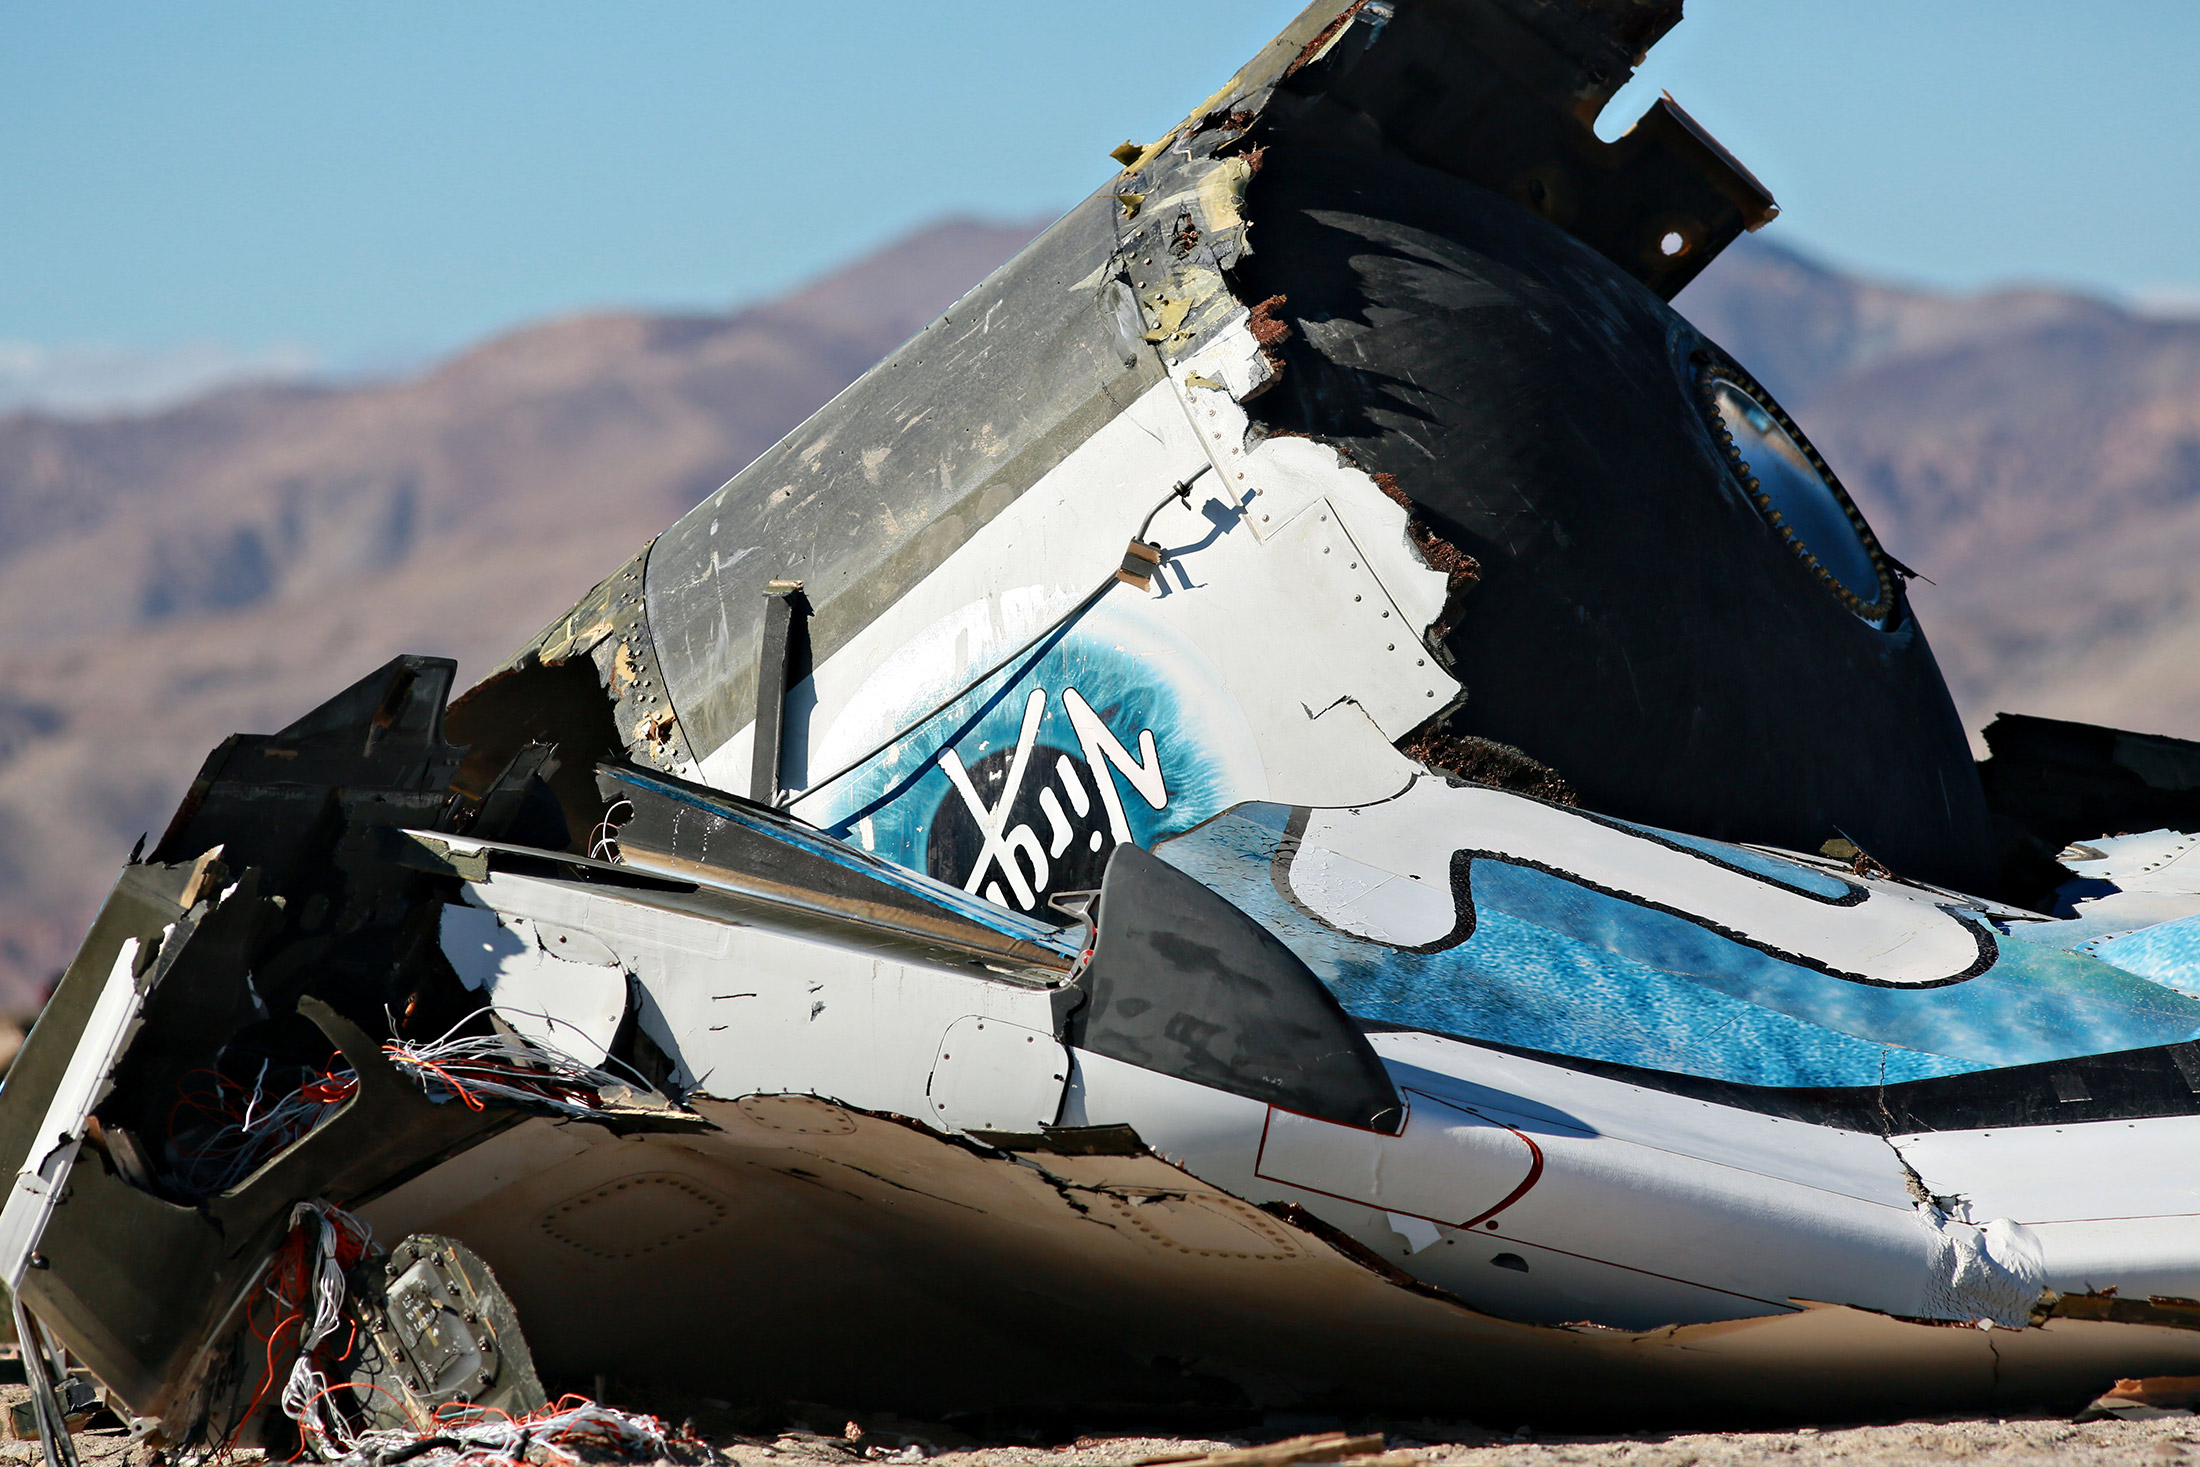 Debris from Virgin Galactic SpaceShip 2 sits in a desert field Nov. 2, 2014 north of Mojave, Calif. The Virgin Galactic SpaceShip 2 crashed on Oct. 31, 2014 during a test flight, killing one pilot and seriously injuring another
